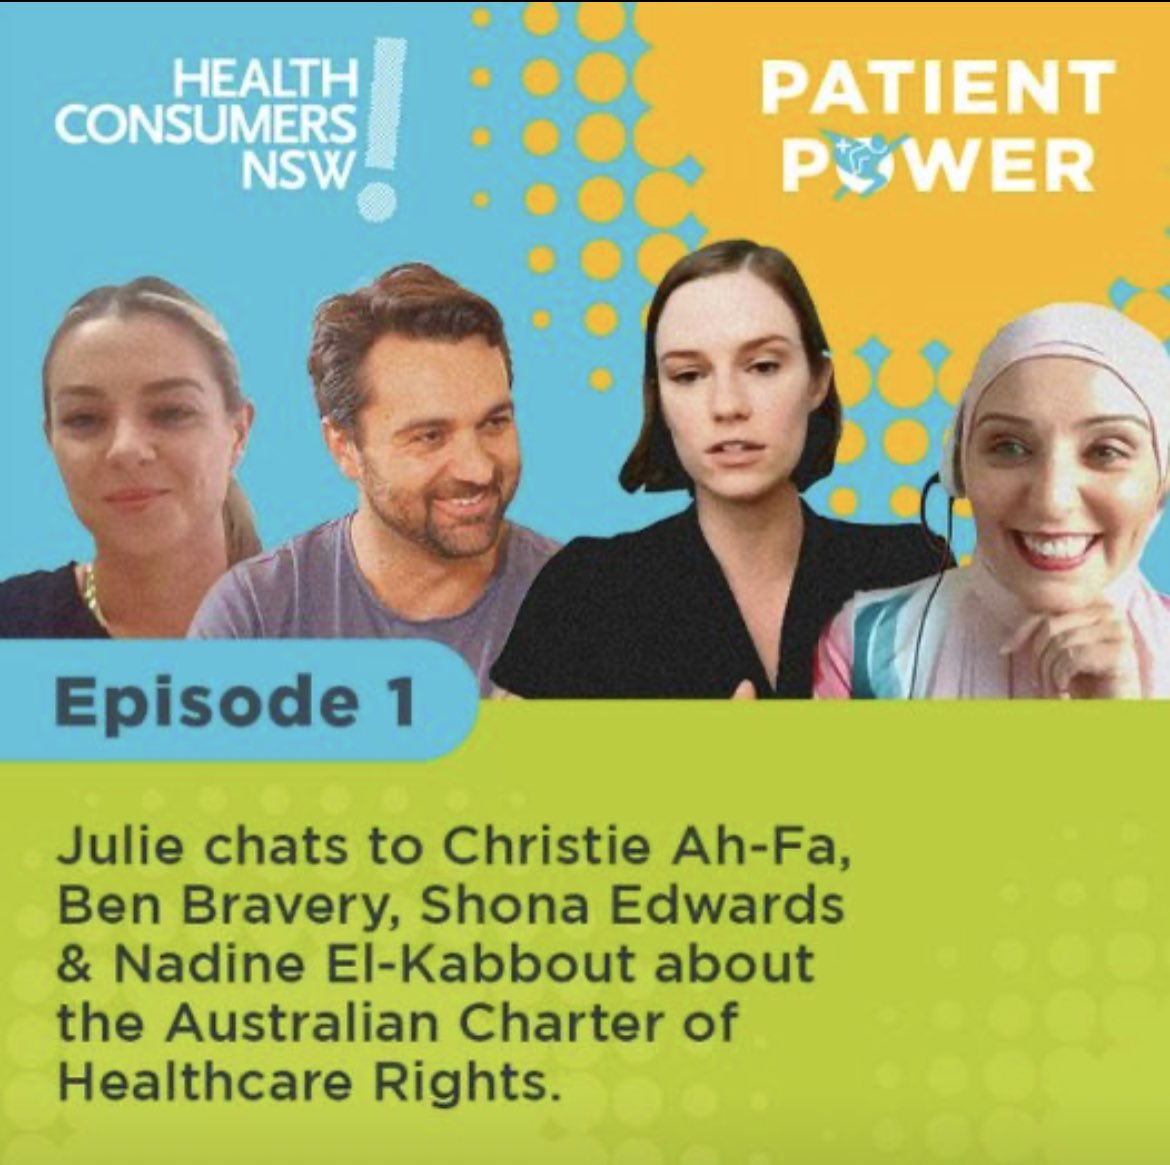 Do you know your #healthcare rights? Episode 1 in the new Health Consumers NSW Patient Power series is now available. Tune in to hear host Julie McCrossin AM in conversation with health consumers Christie Ah-Fa, Shona Edwards and Nadine El-Kabbout, as well as Dr Ben Bravery, on…